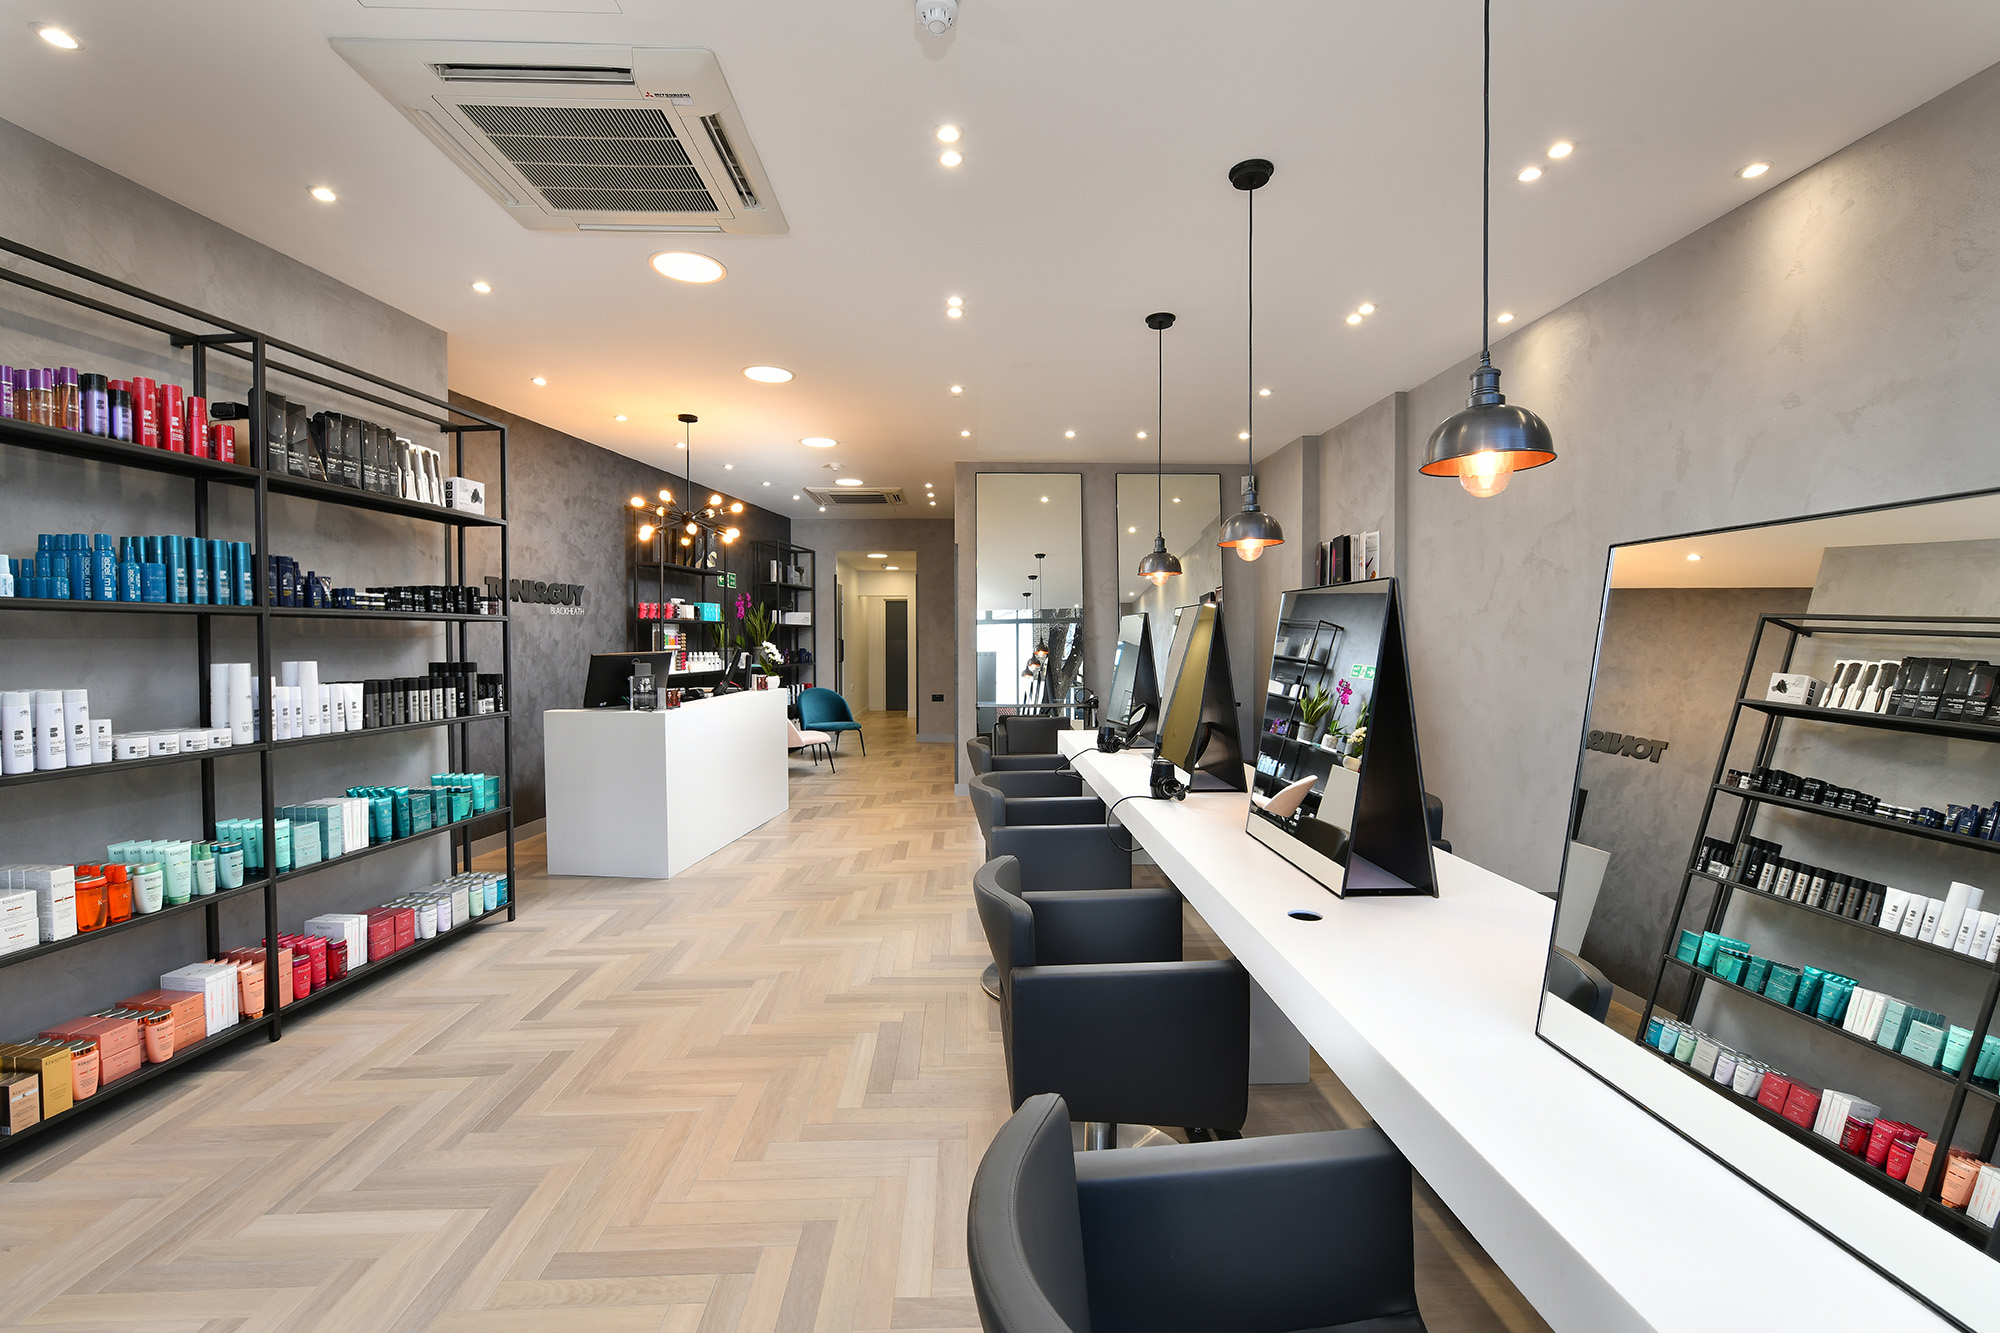 Premier Interior Systems - Toni and Guy - Interior Fit Out Refurbishment Retail Bespoke Turnkey